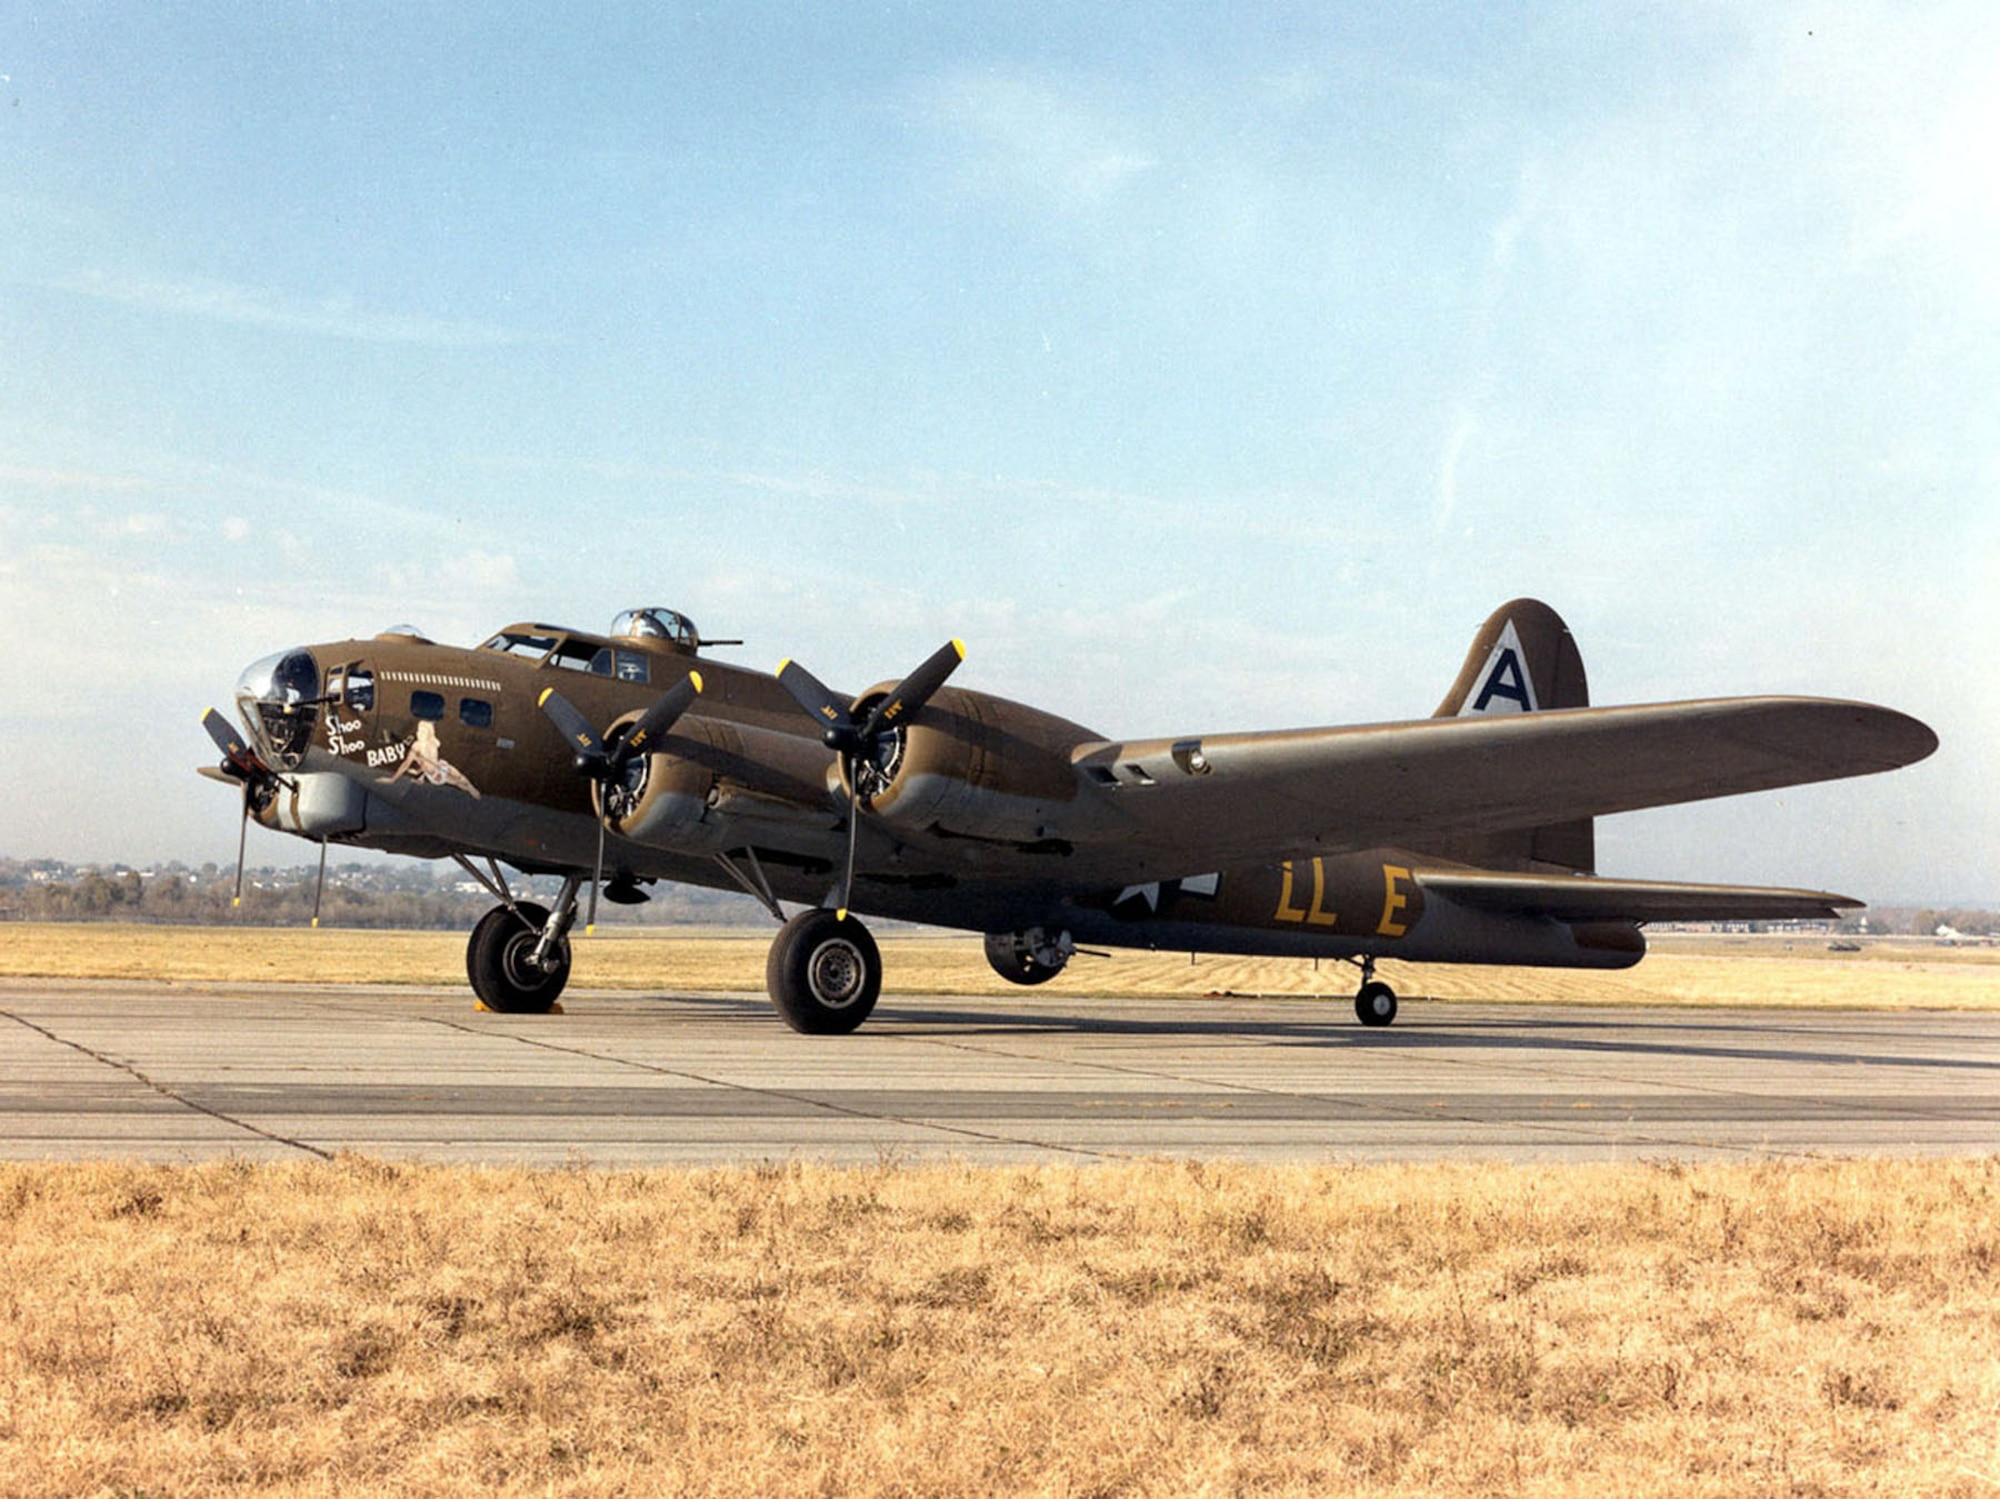 DAYTON, Ohio -- Boeing B-17G Flying Fortress "Shoo Shoo Shoo Baby" at the National Museum of the United States Air Force. (U.S. Air Force photo)